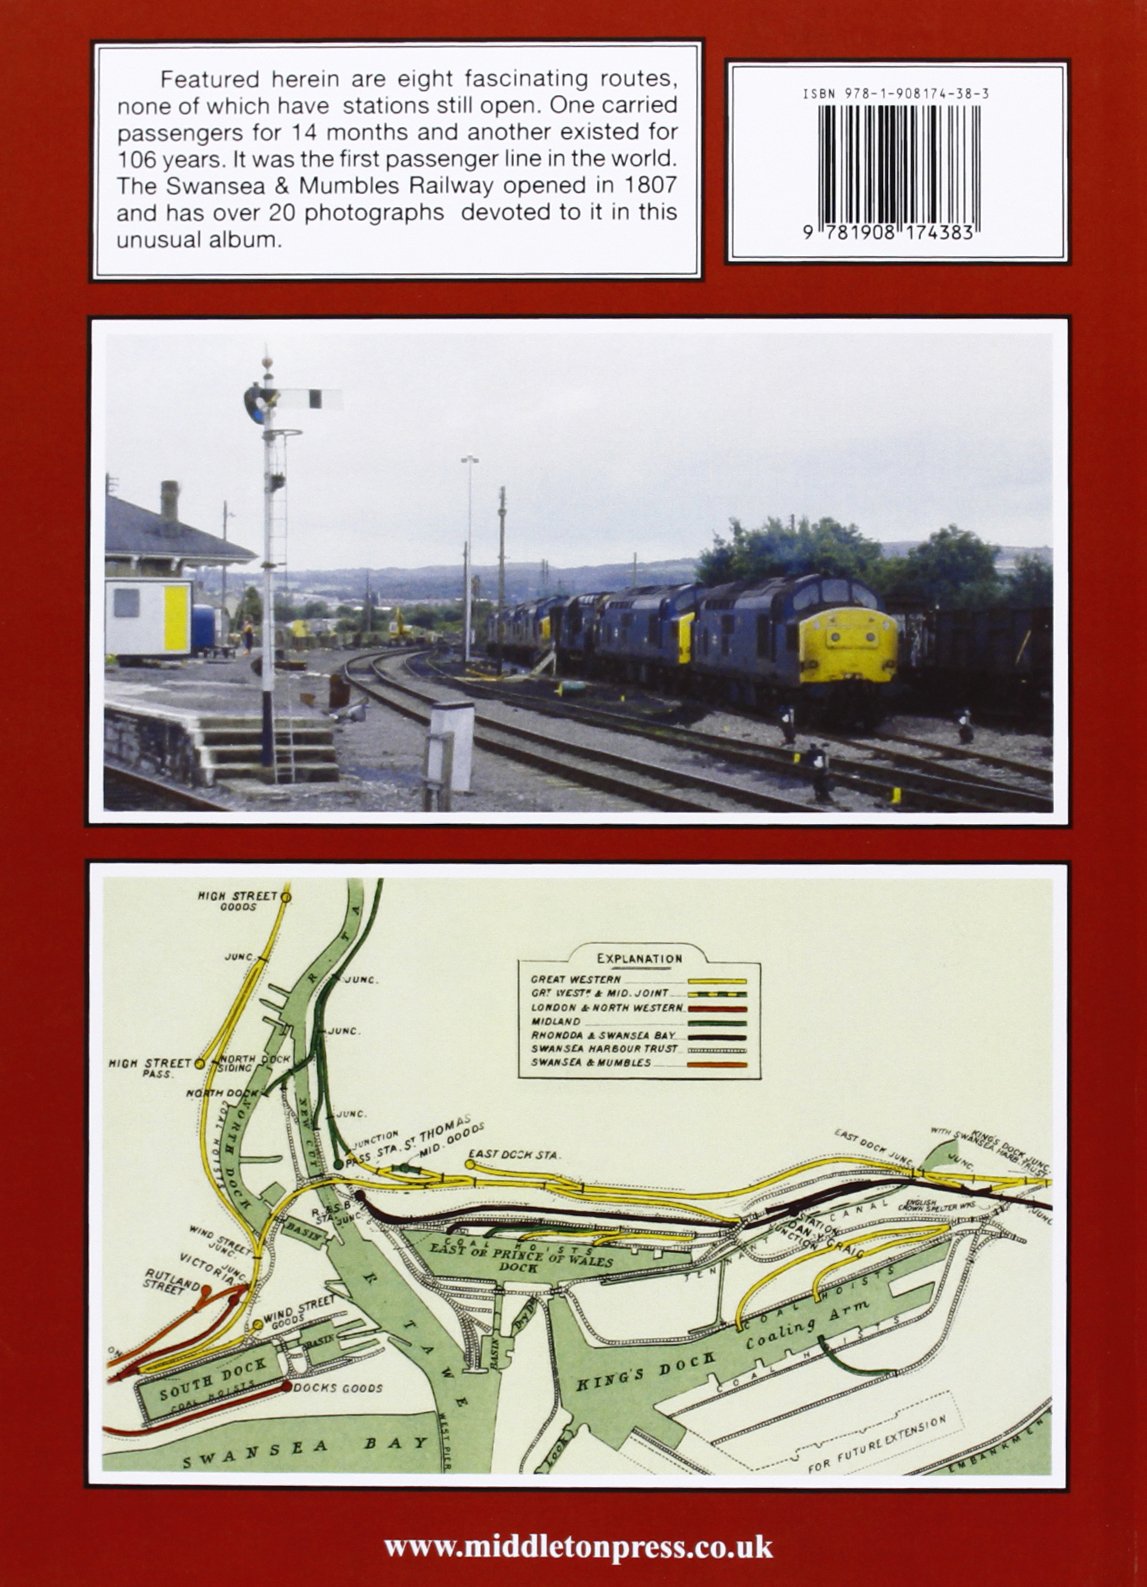 Branch Lines around Swansea including the Swansea & Mumbles Railway OUT OF PRINT TO BE REPRINTED